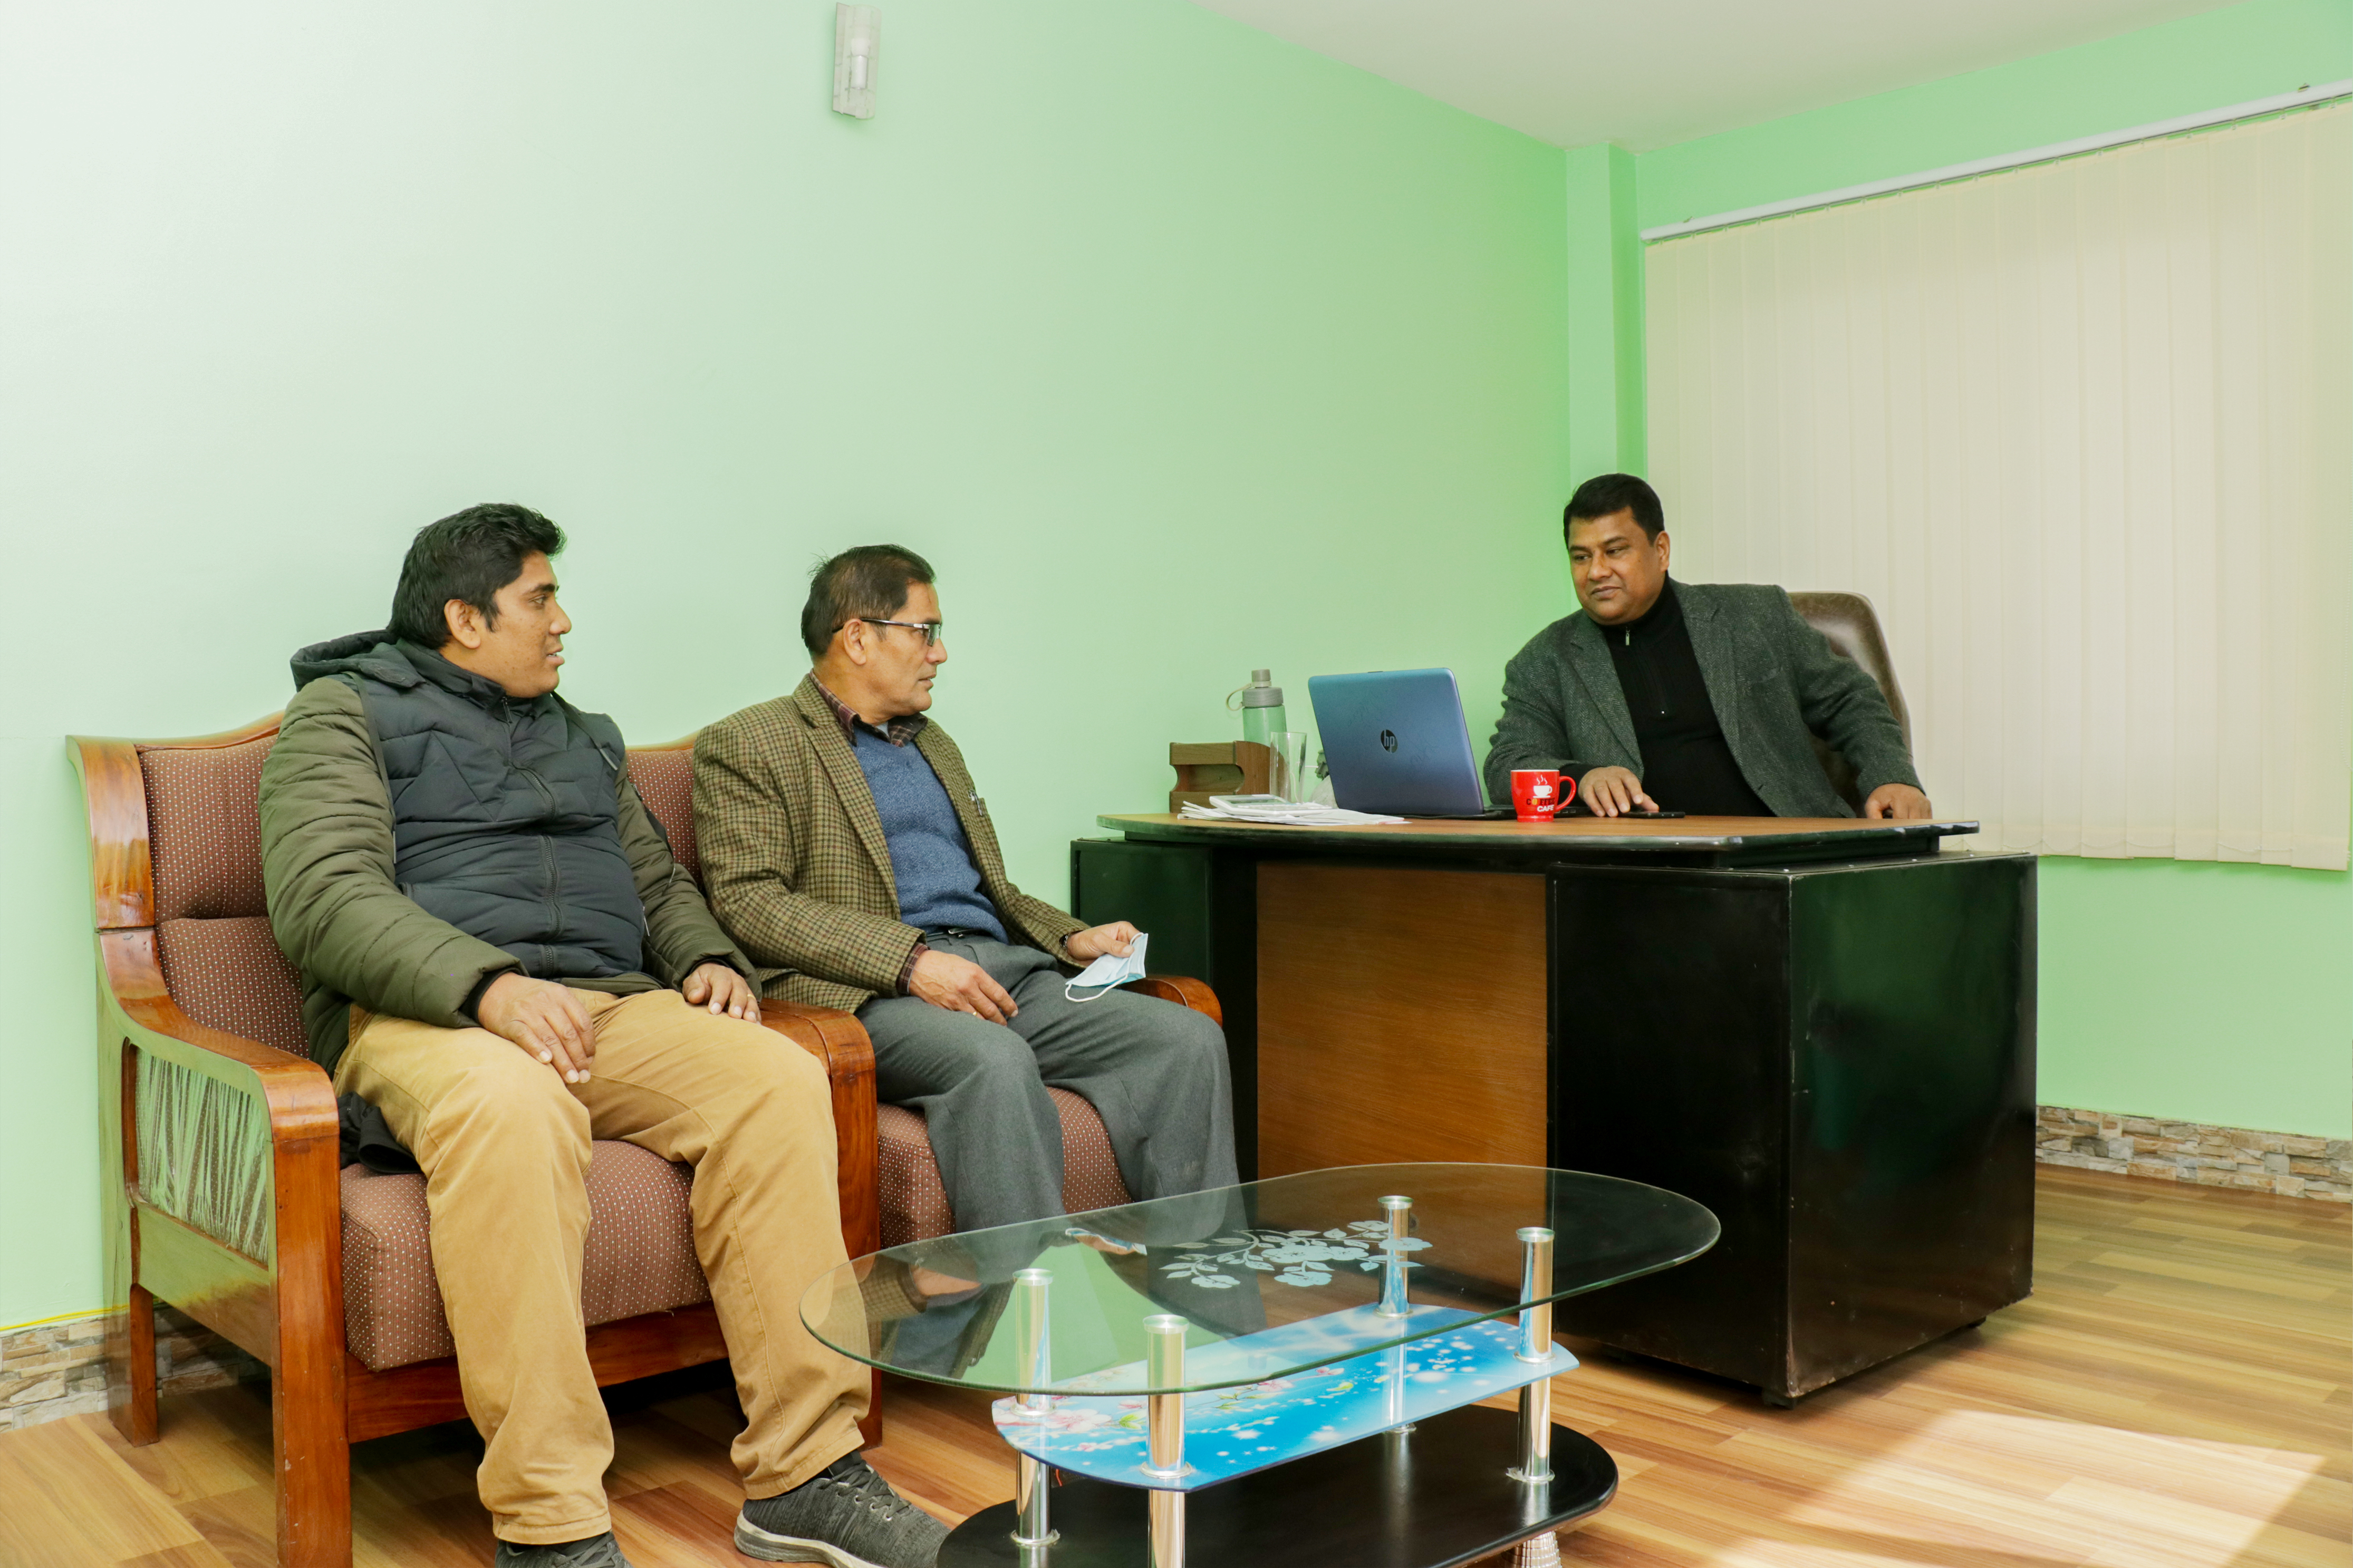 dss nepal gallery images